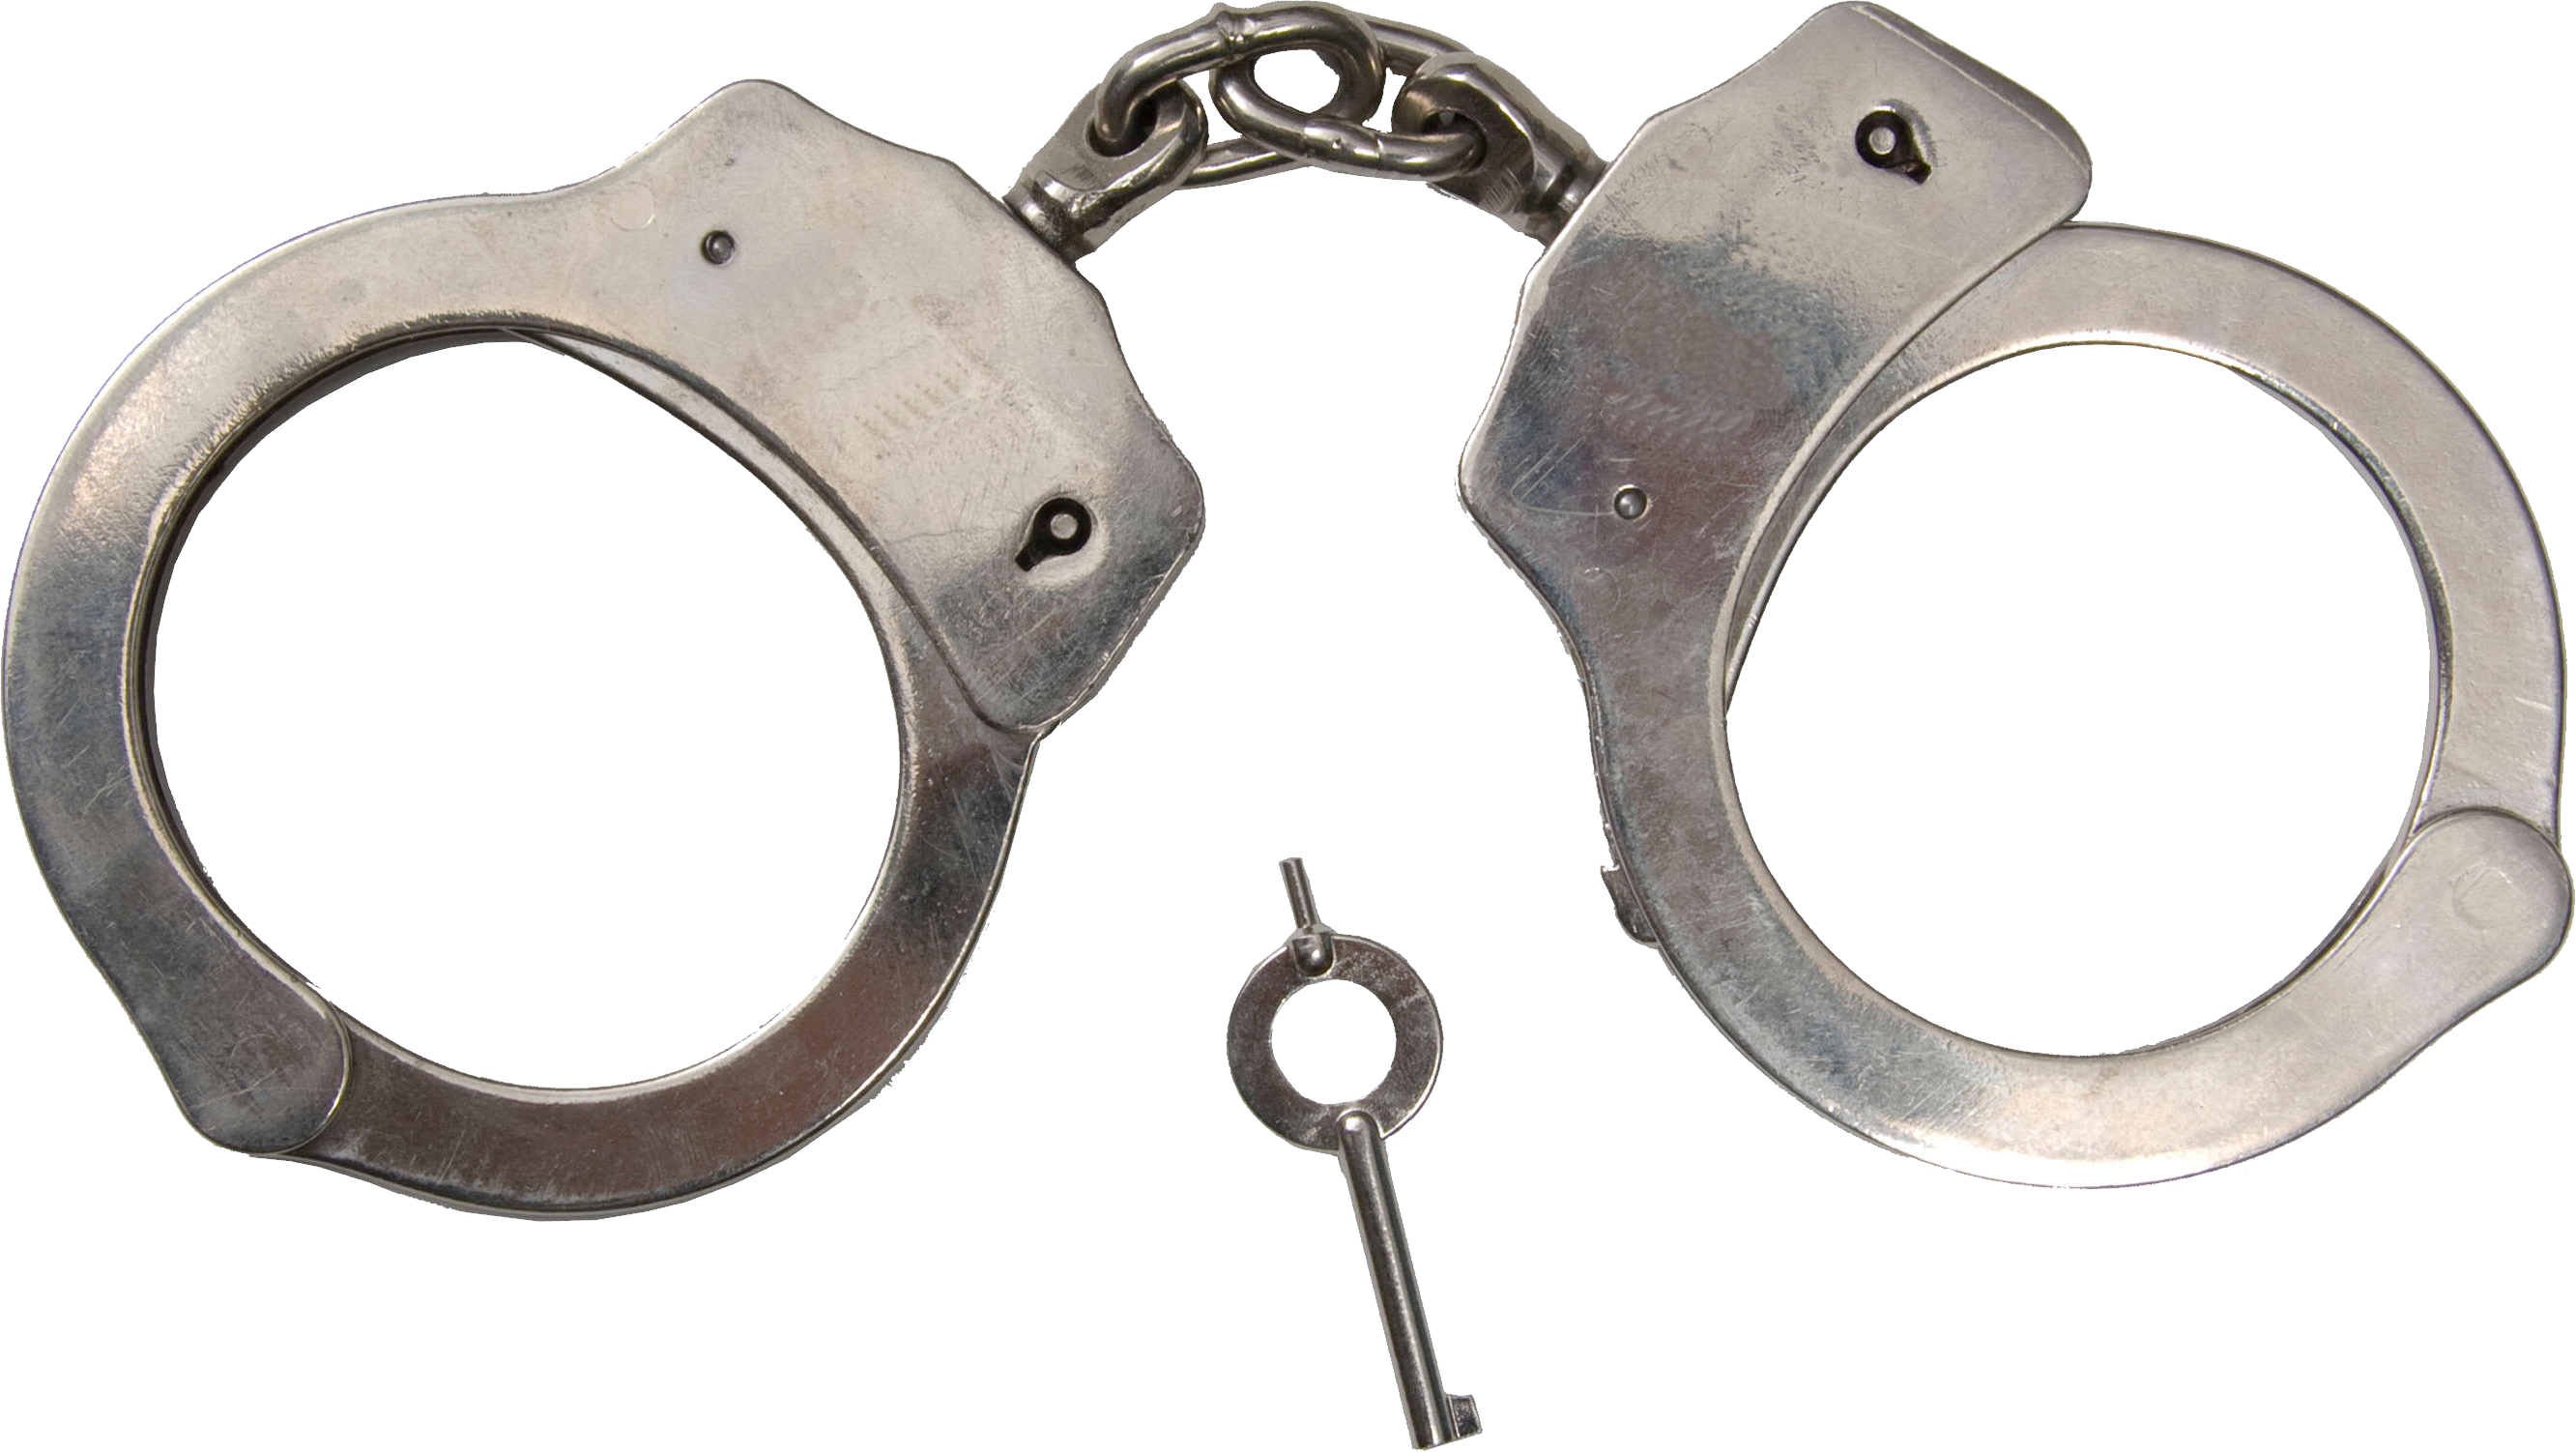 Handcuffs clipart shackles. Classic metal png image